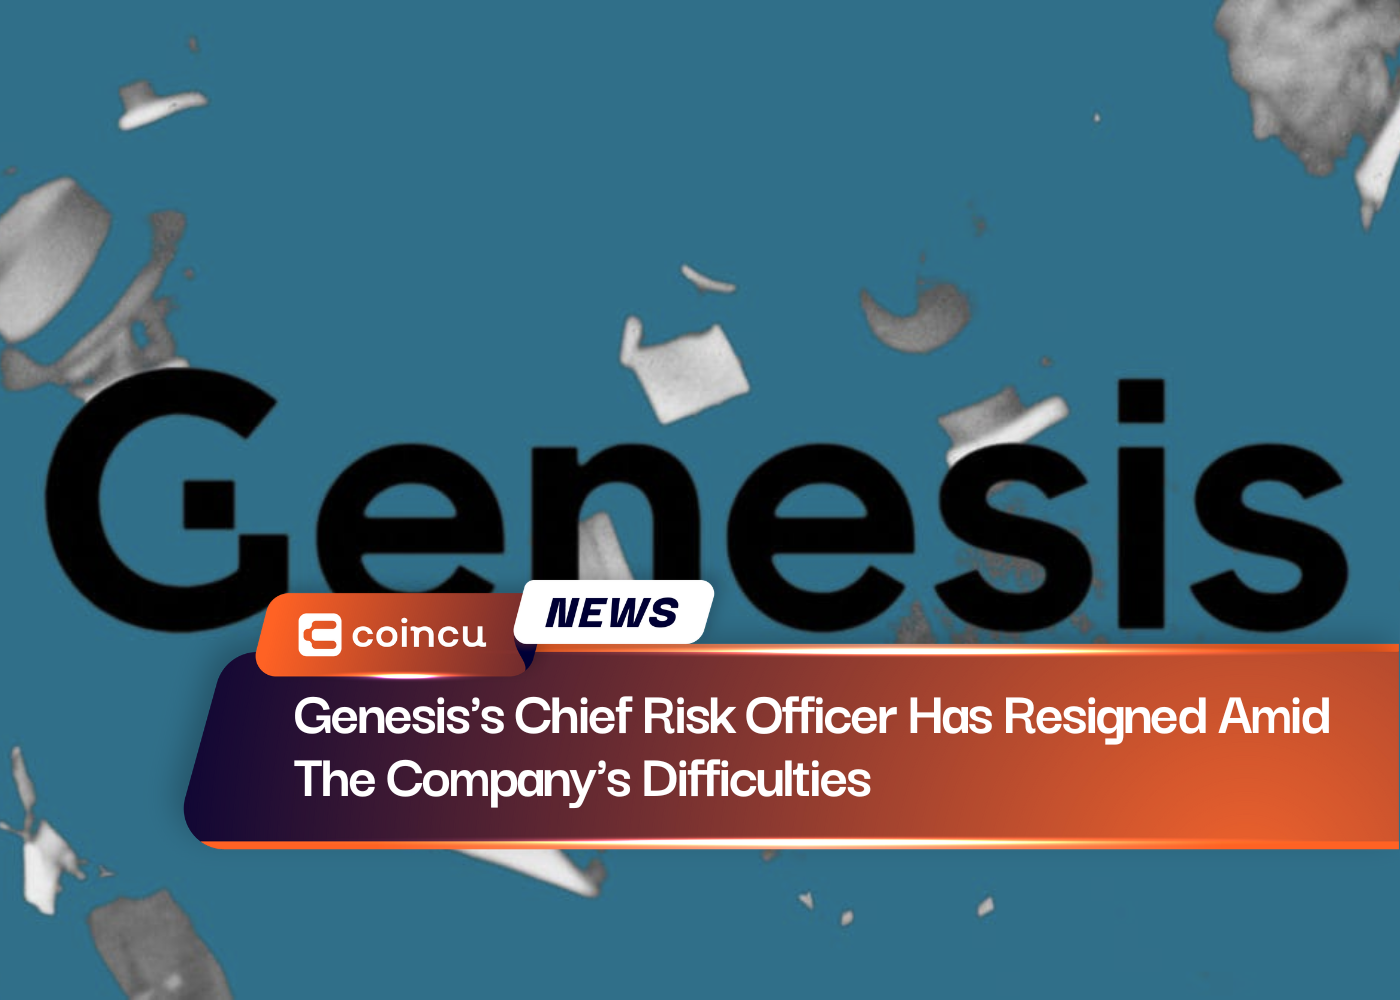 Genesis's Chief Risk Officer Has Resigned Amid The Company's Difficulties